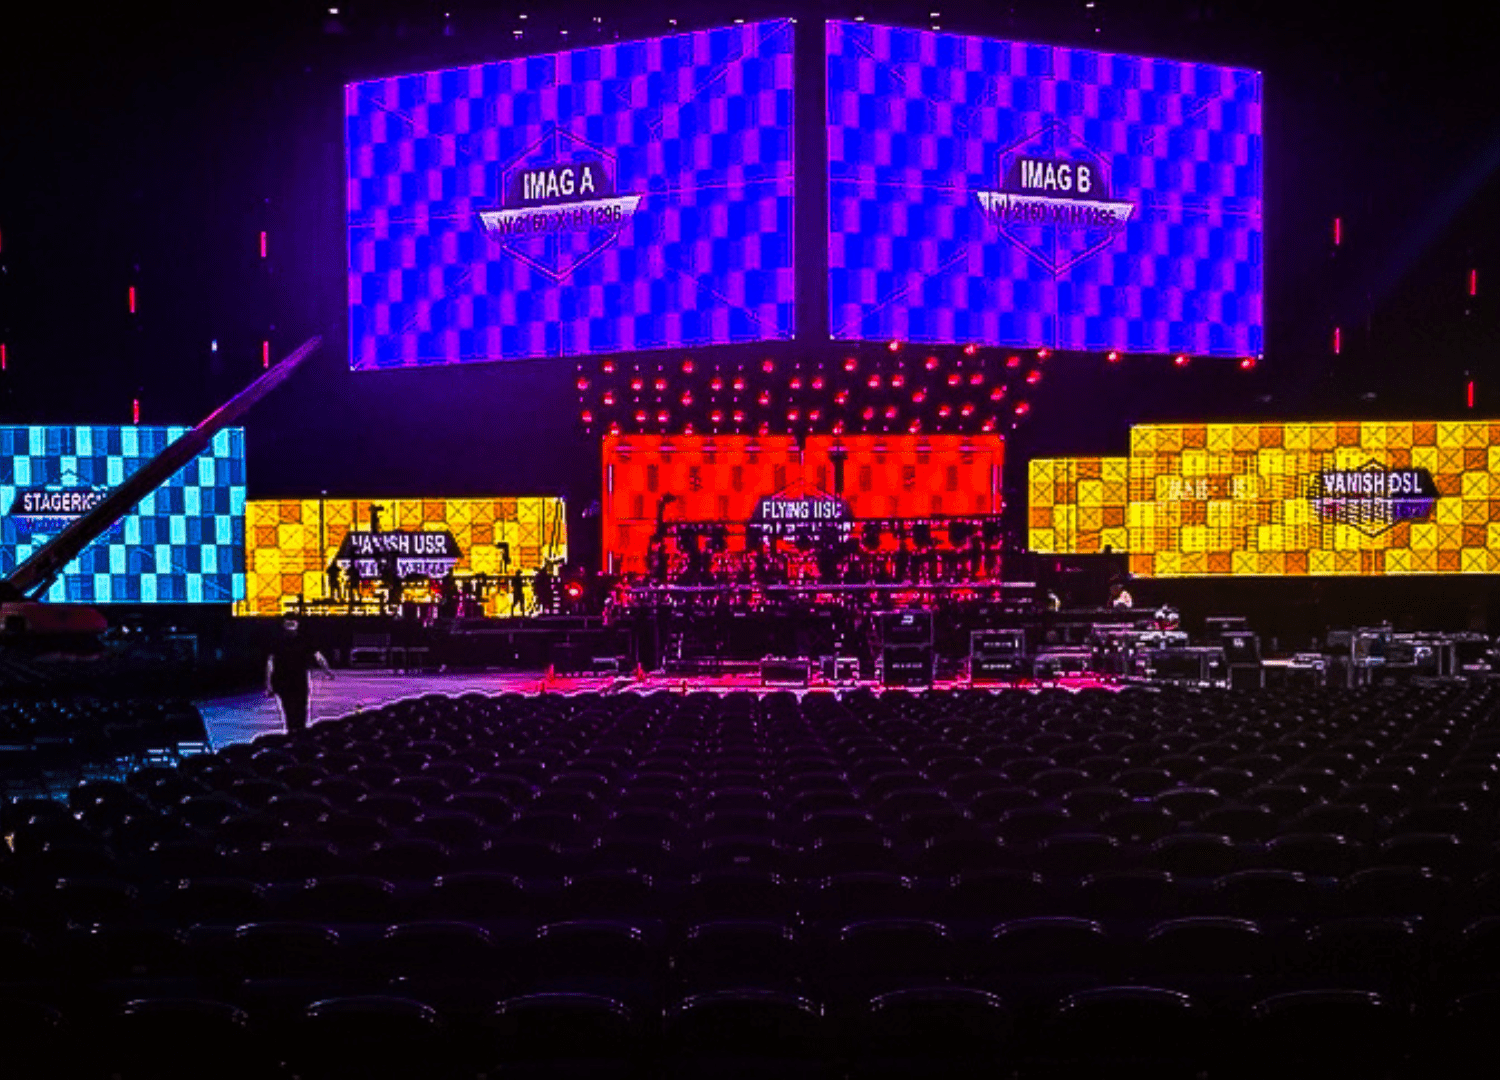 Image of LED stage at Essence Festival of Culture 2023